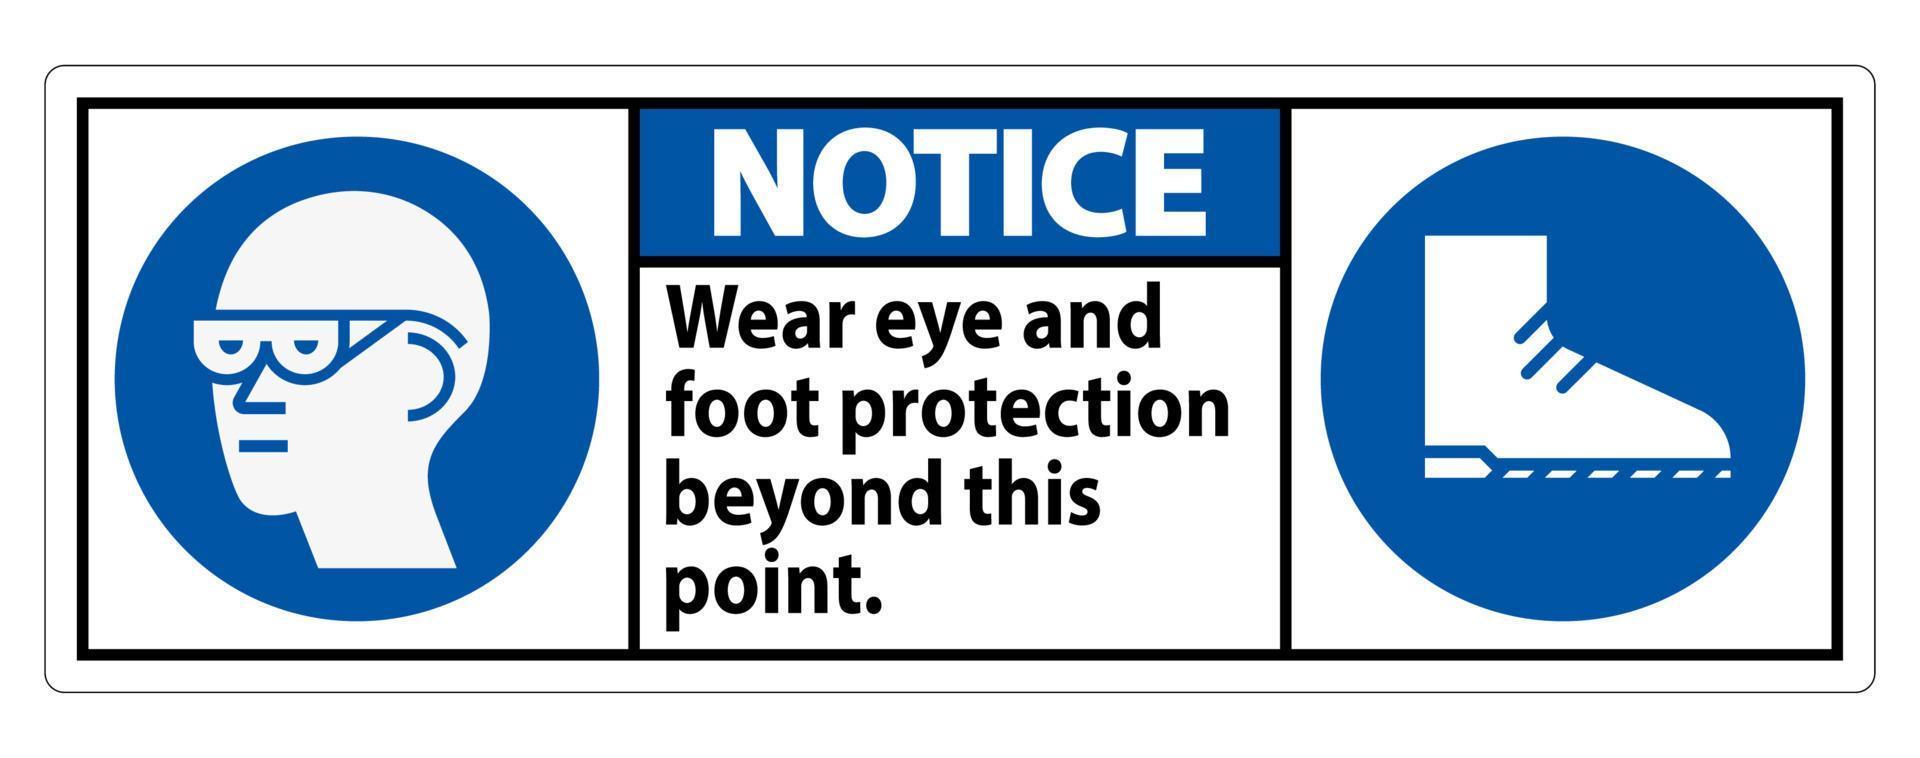 Notice Sign Wear Eye And Foot Protection Beyond This Point With PPE Symbols vector